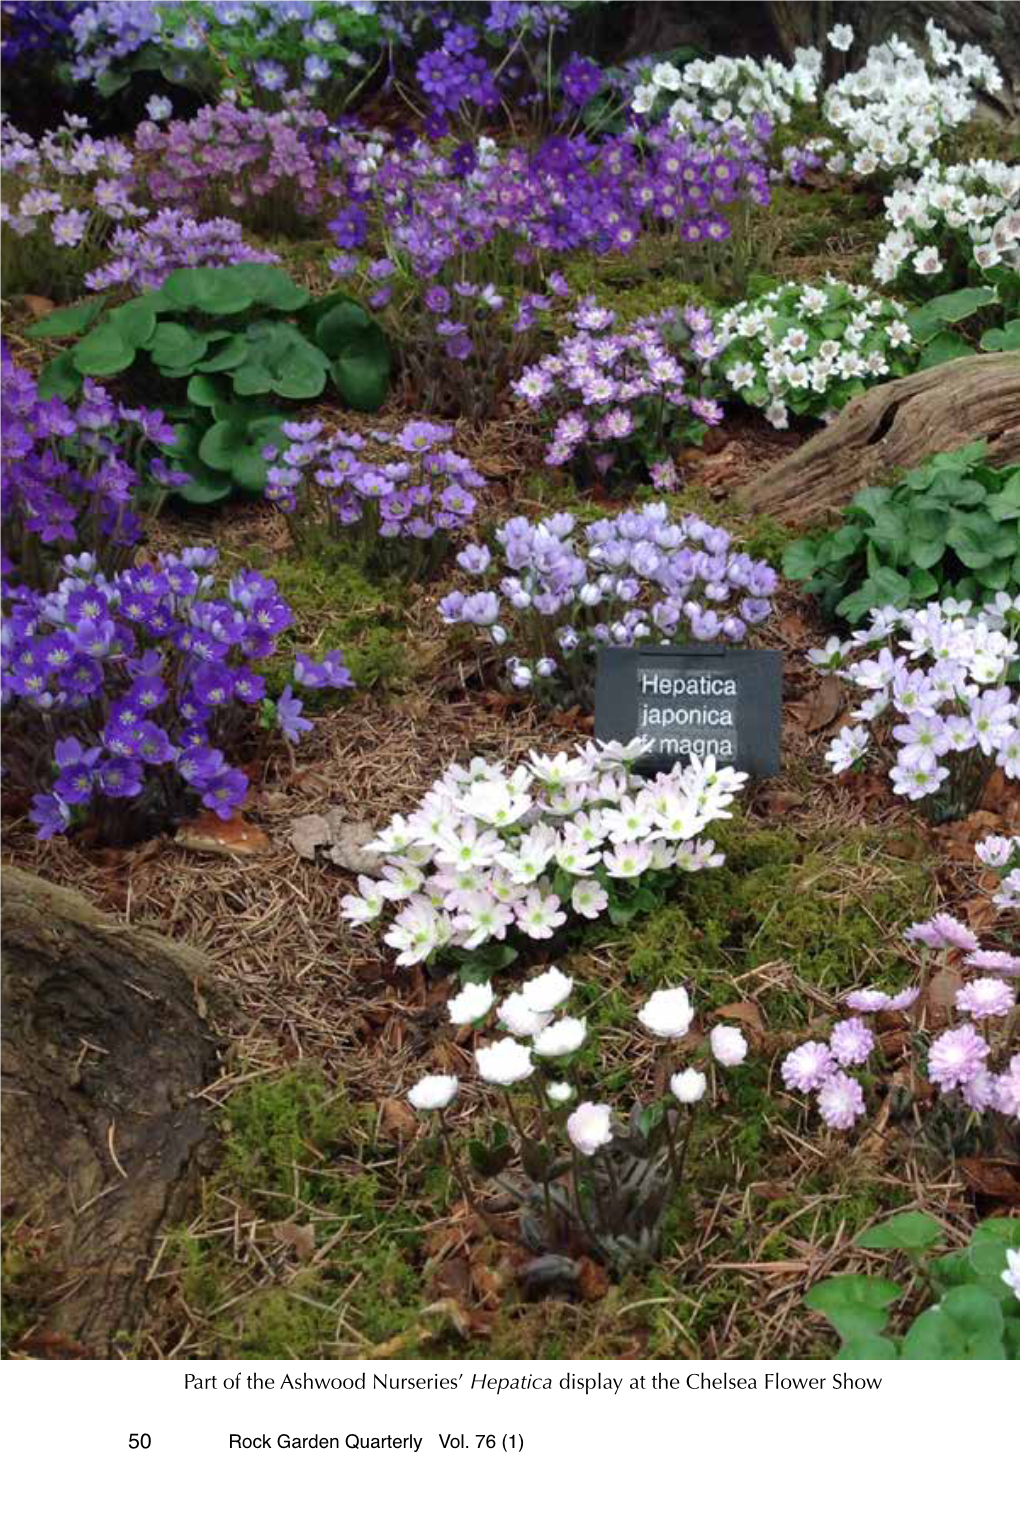 Hepatica Display at the Chelsea Flower Show